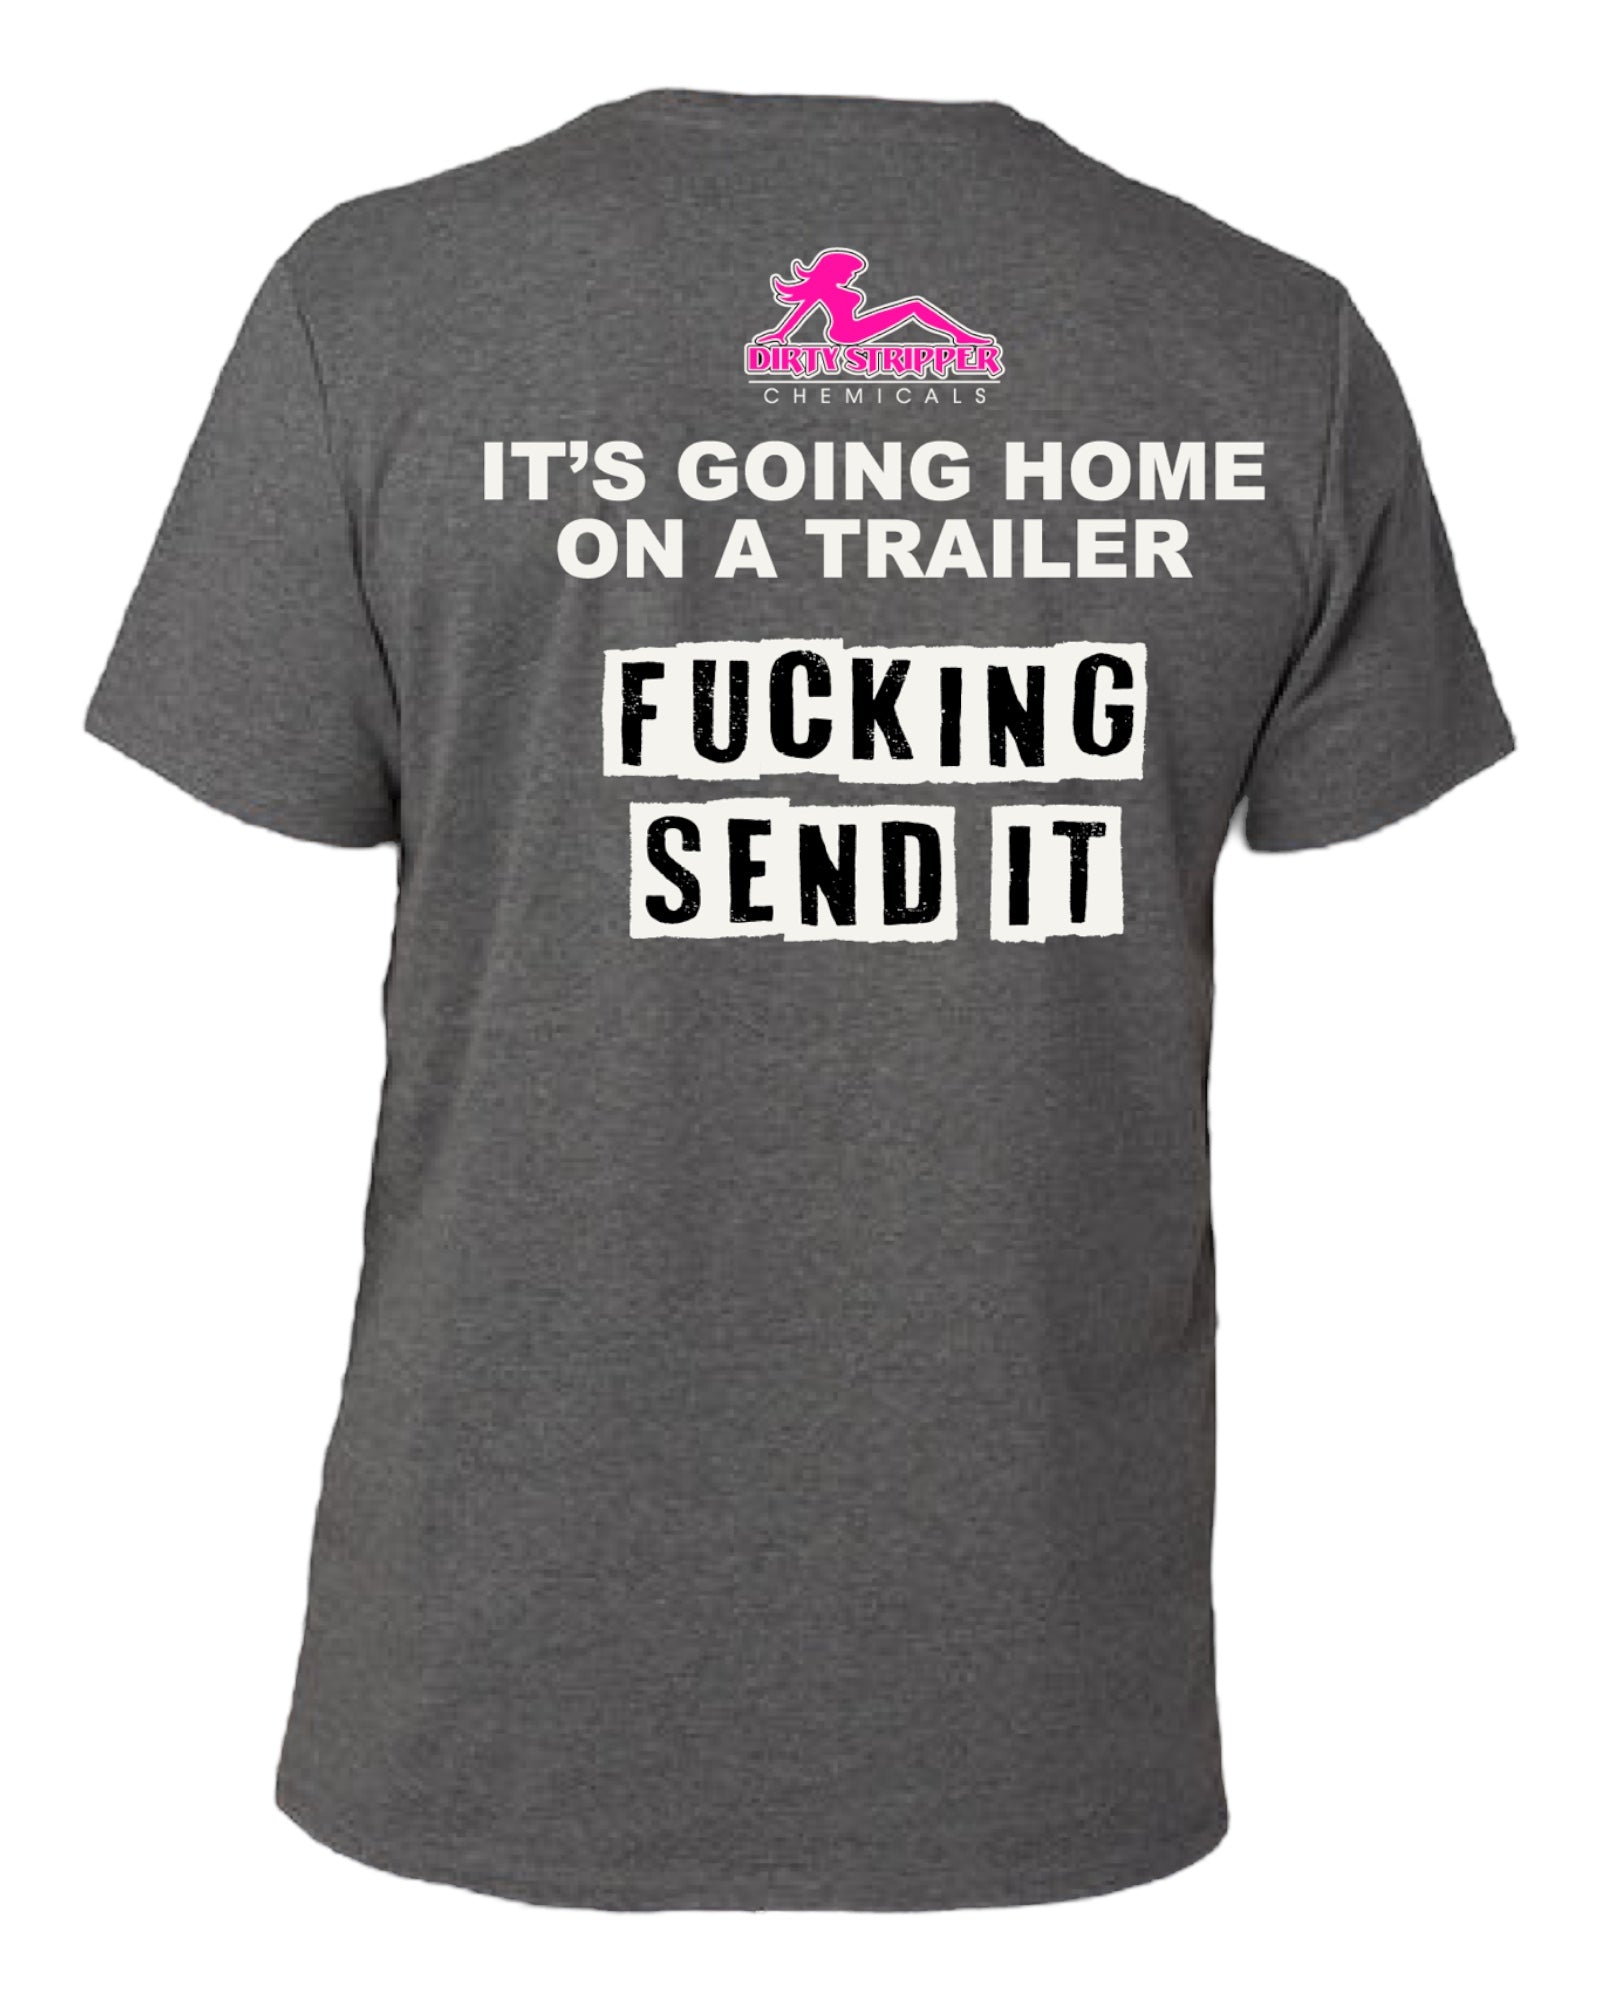 It’s Going Home on a Trailer T-Shirt(Graphite Grey)